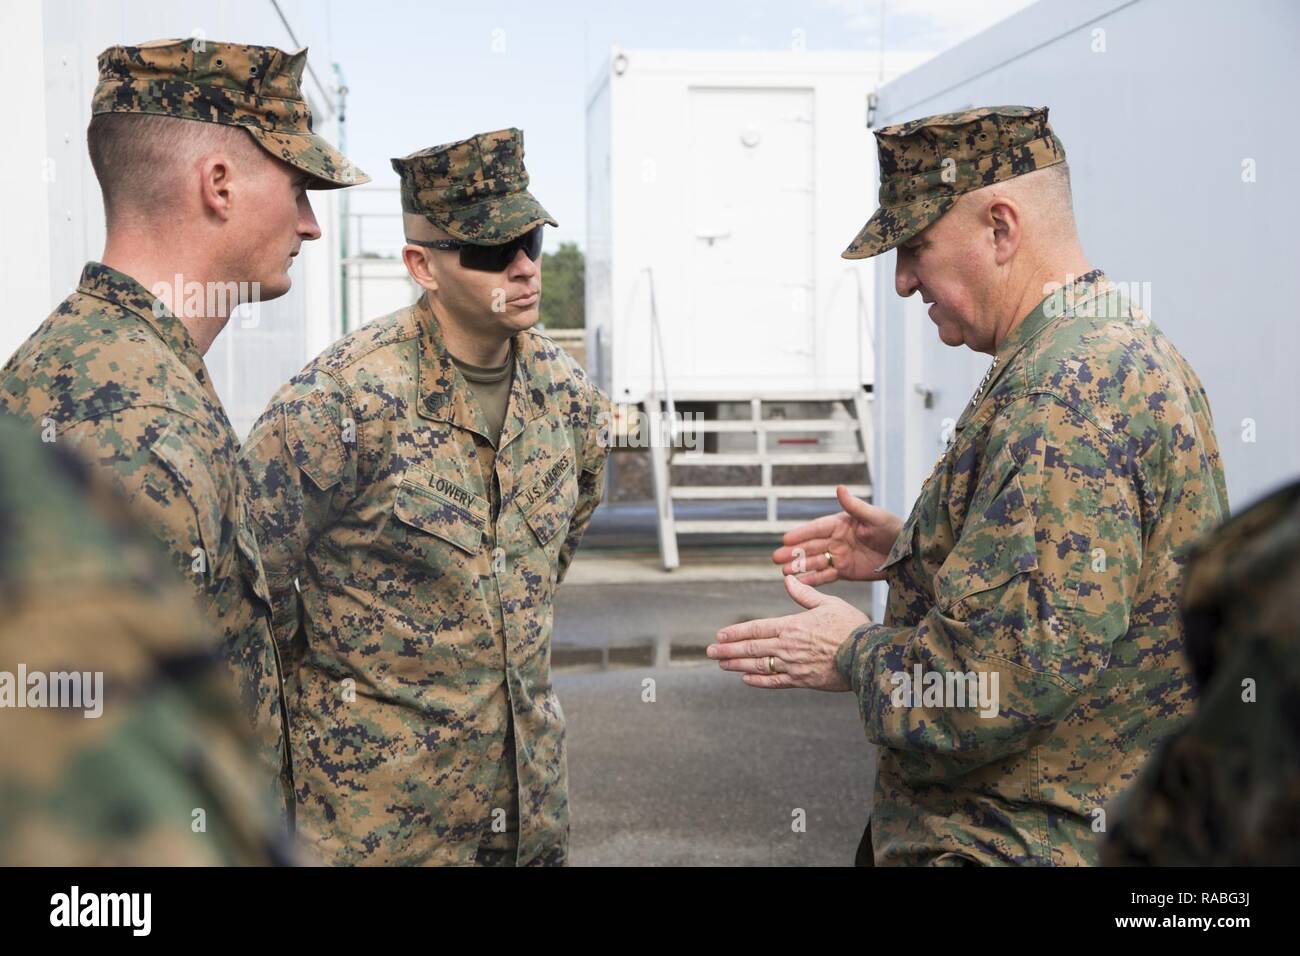 U.S. Marine Corps Gen. Glenn Walters, Assistant Commandant of the Marine Corps, right, speaks with Gunnery Sgt. Joseph Lowery, master gunner, 2nd Tank Battalion, 2nd Marine Division, in regards to the Advanced Gunnery Training System during a visit to Camp Lejeune, N.C., Jan. 26, 2017. The purpose of the visit was to increase awareness and capabilities of ground simulation and simulator training systems in support of operational forces combat readiness. Stock Photo